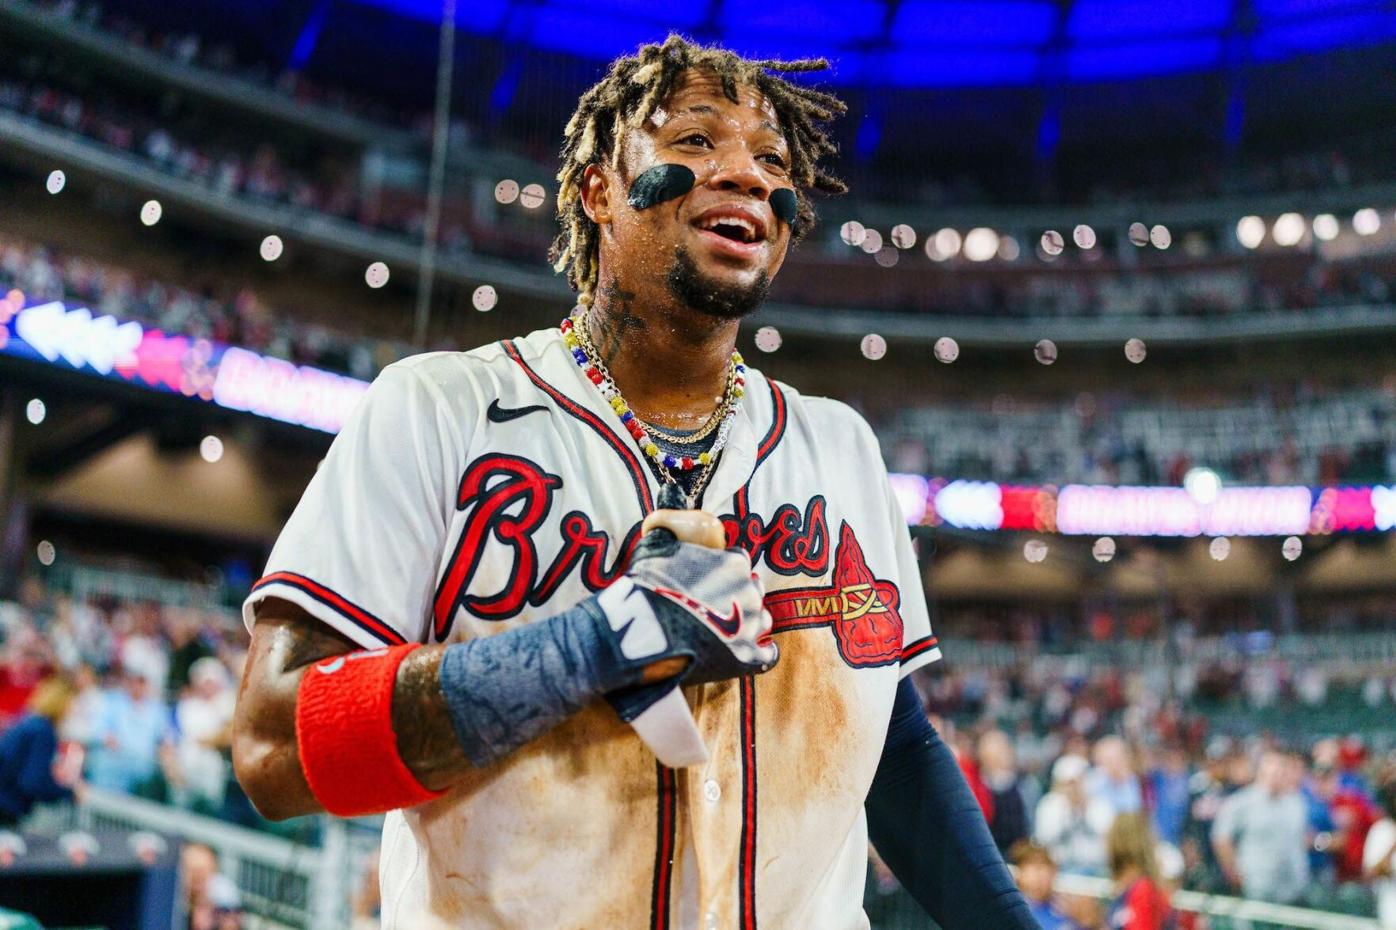 Atlanta Braves slugger Ronald Acuña Jr. becomes the first player